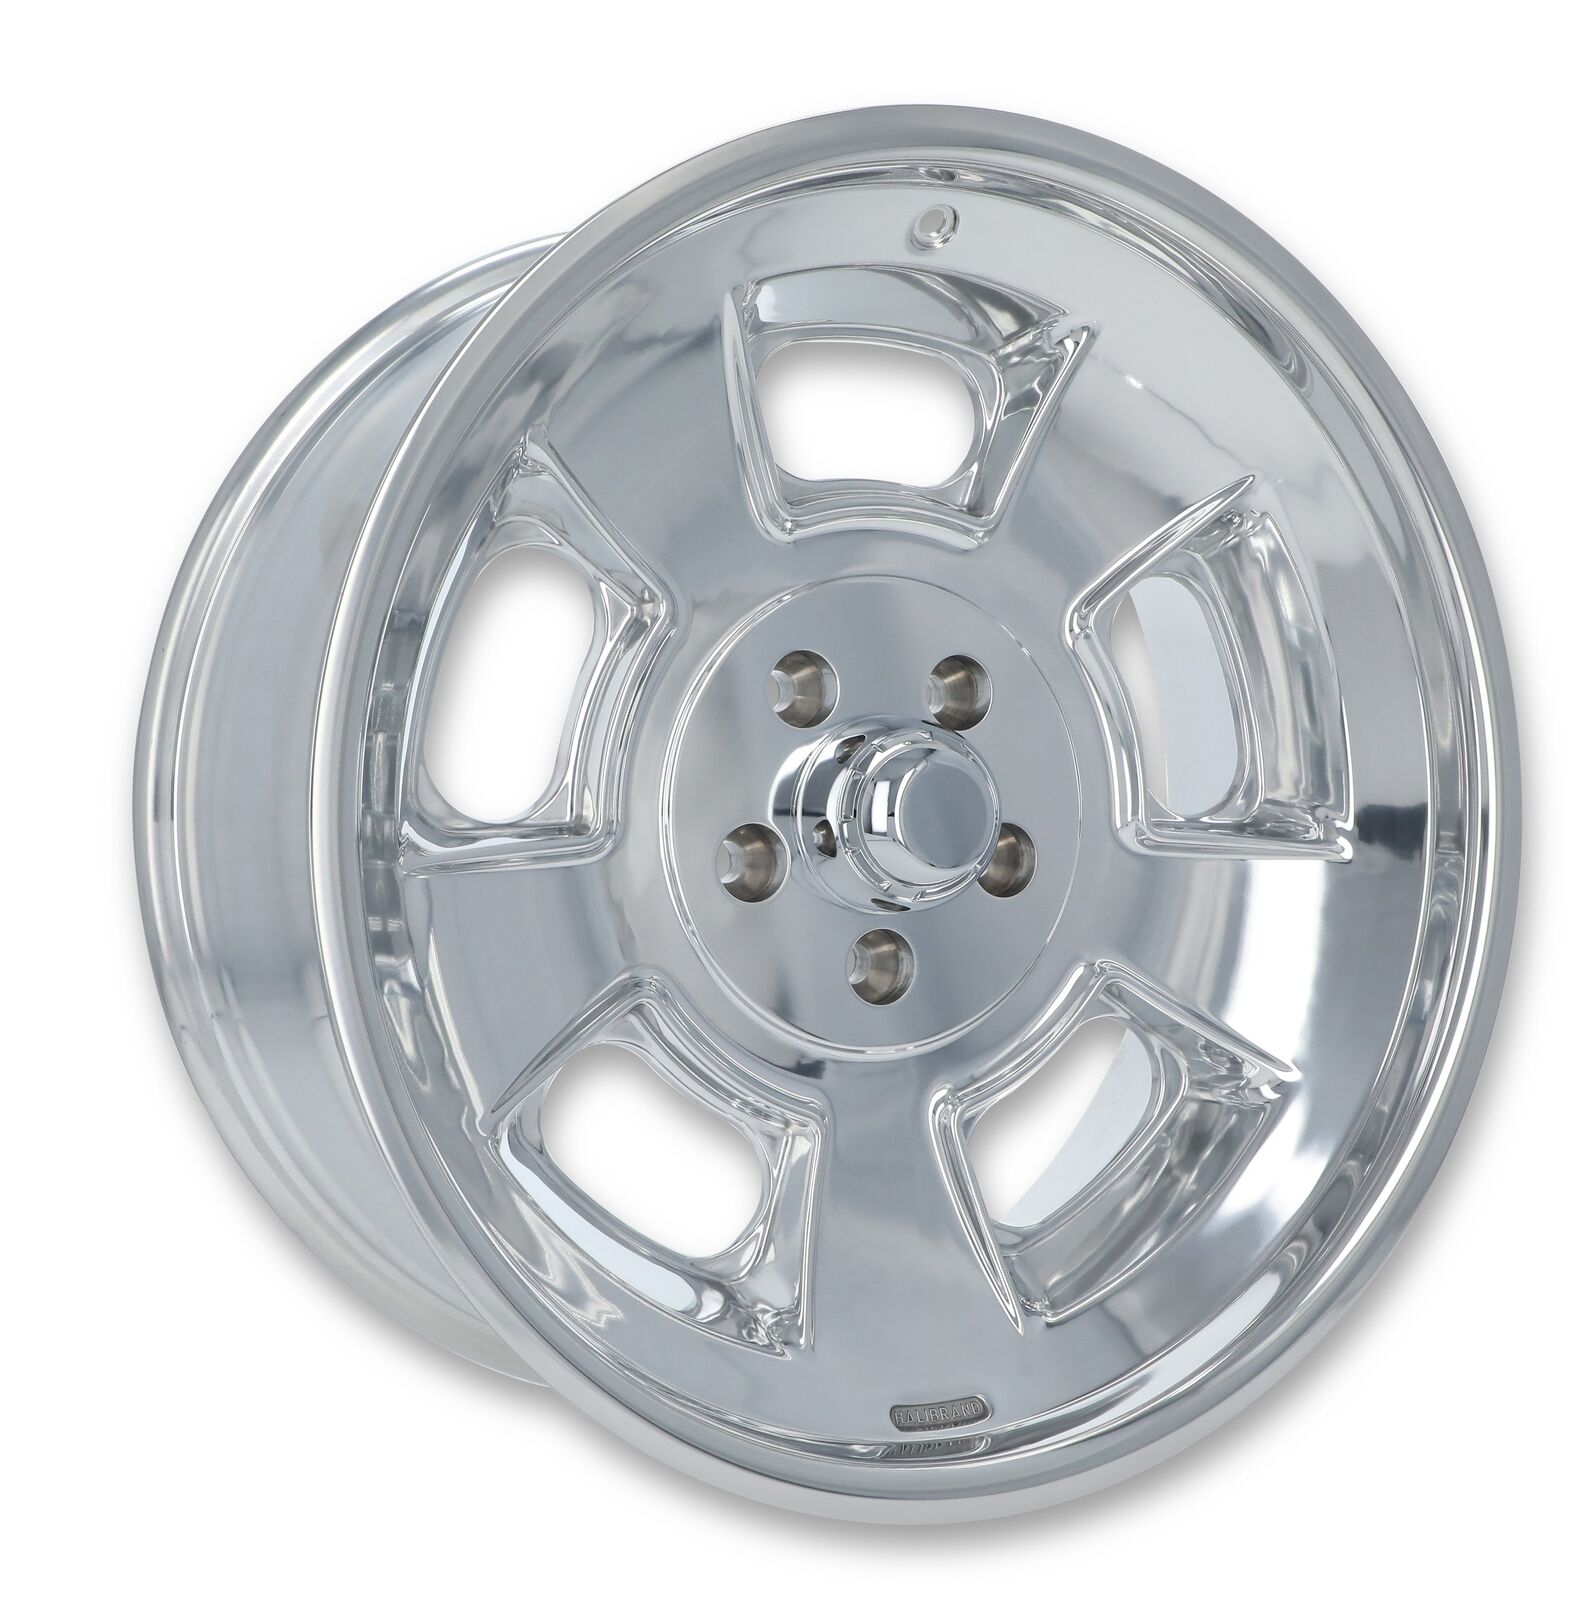 Halibrand Sprint Flow Formed Wheel 20x8.5 - 4.5 bs Polished No Clearcoat - Each